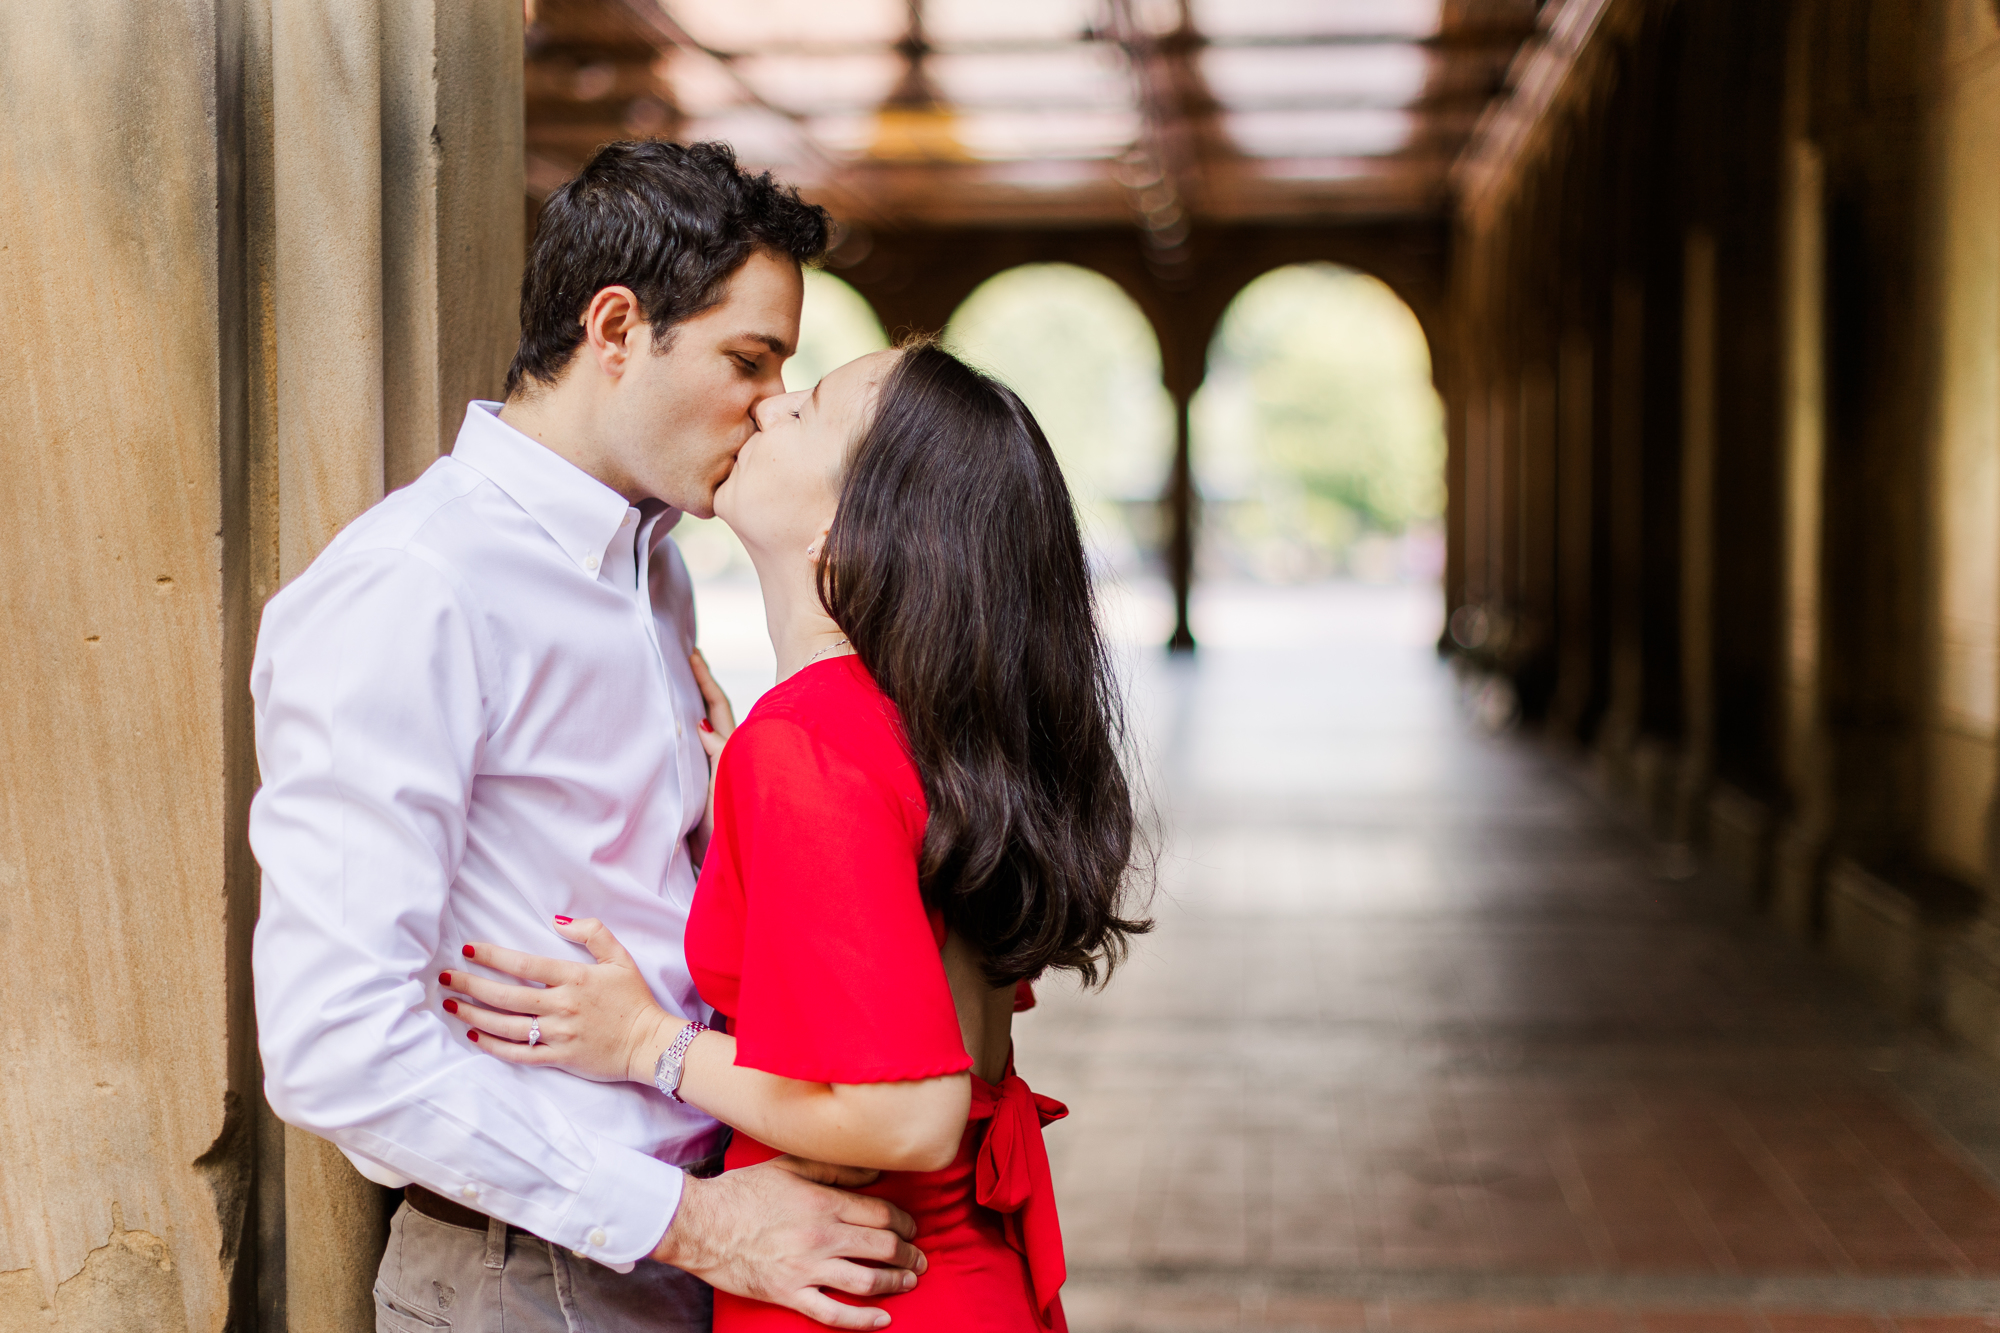 Cheerful Central Park Engagement Photos